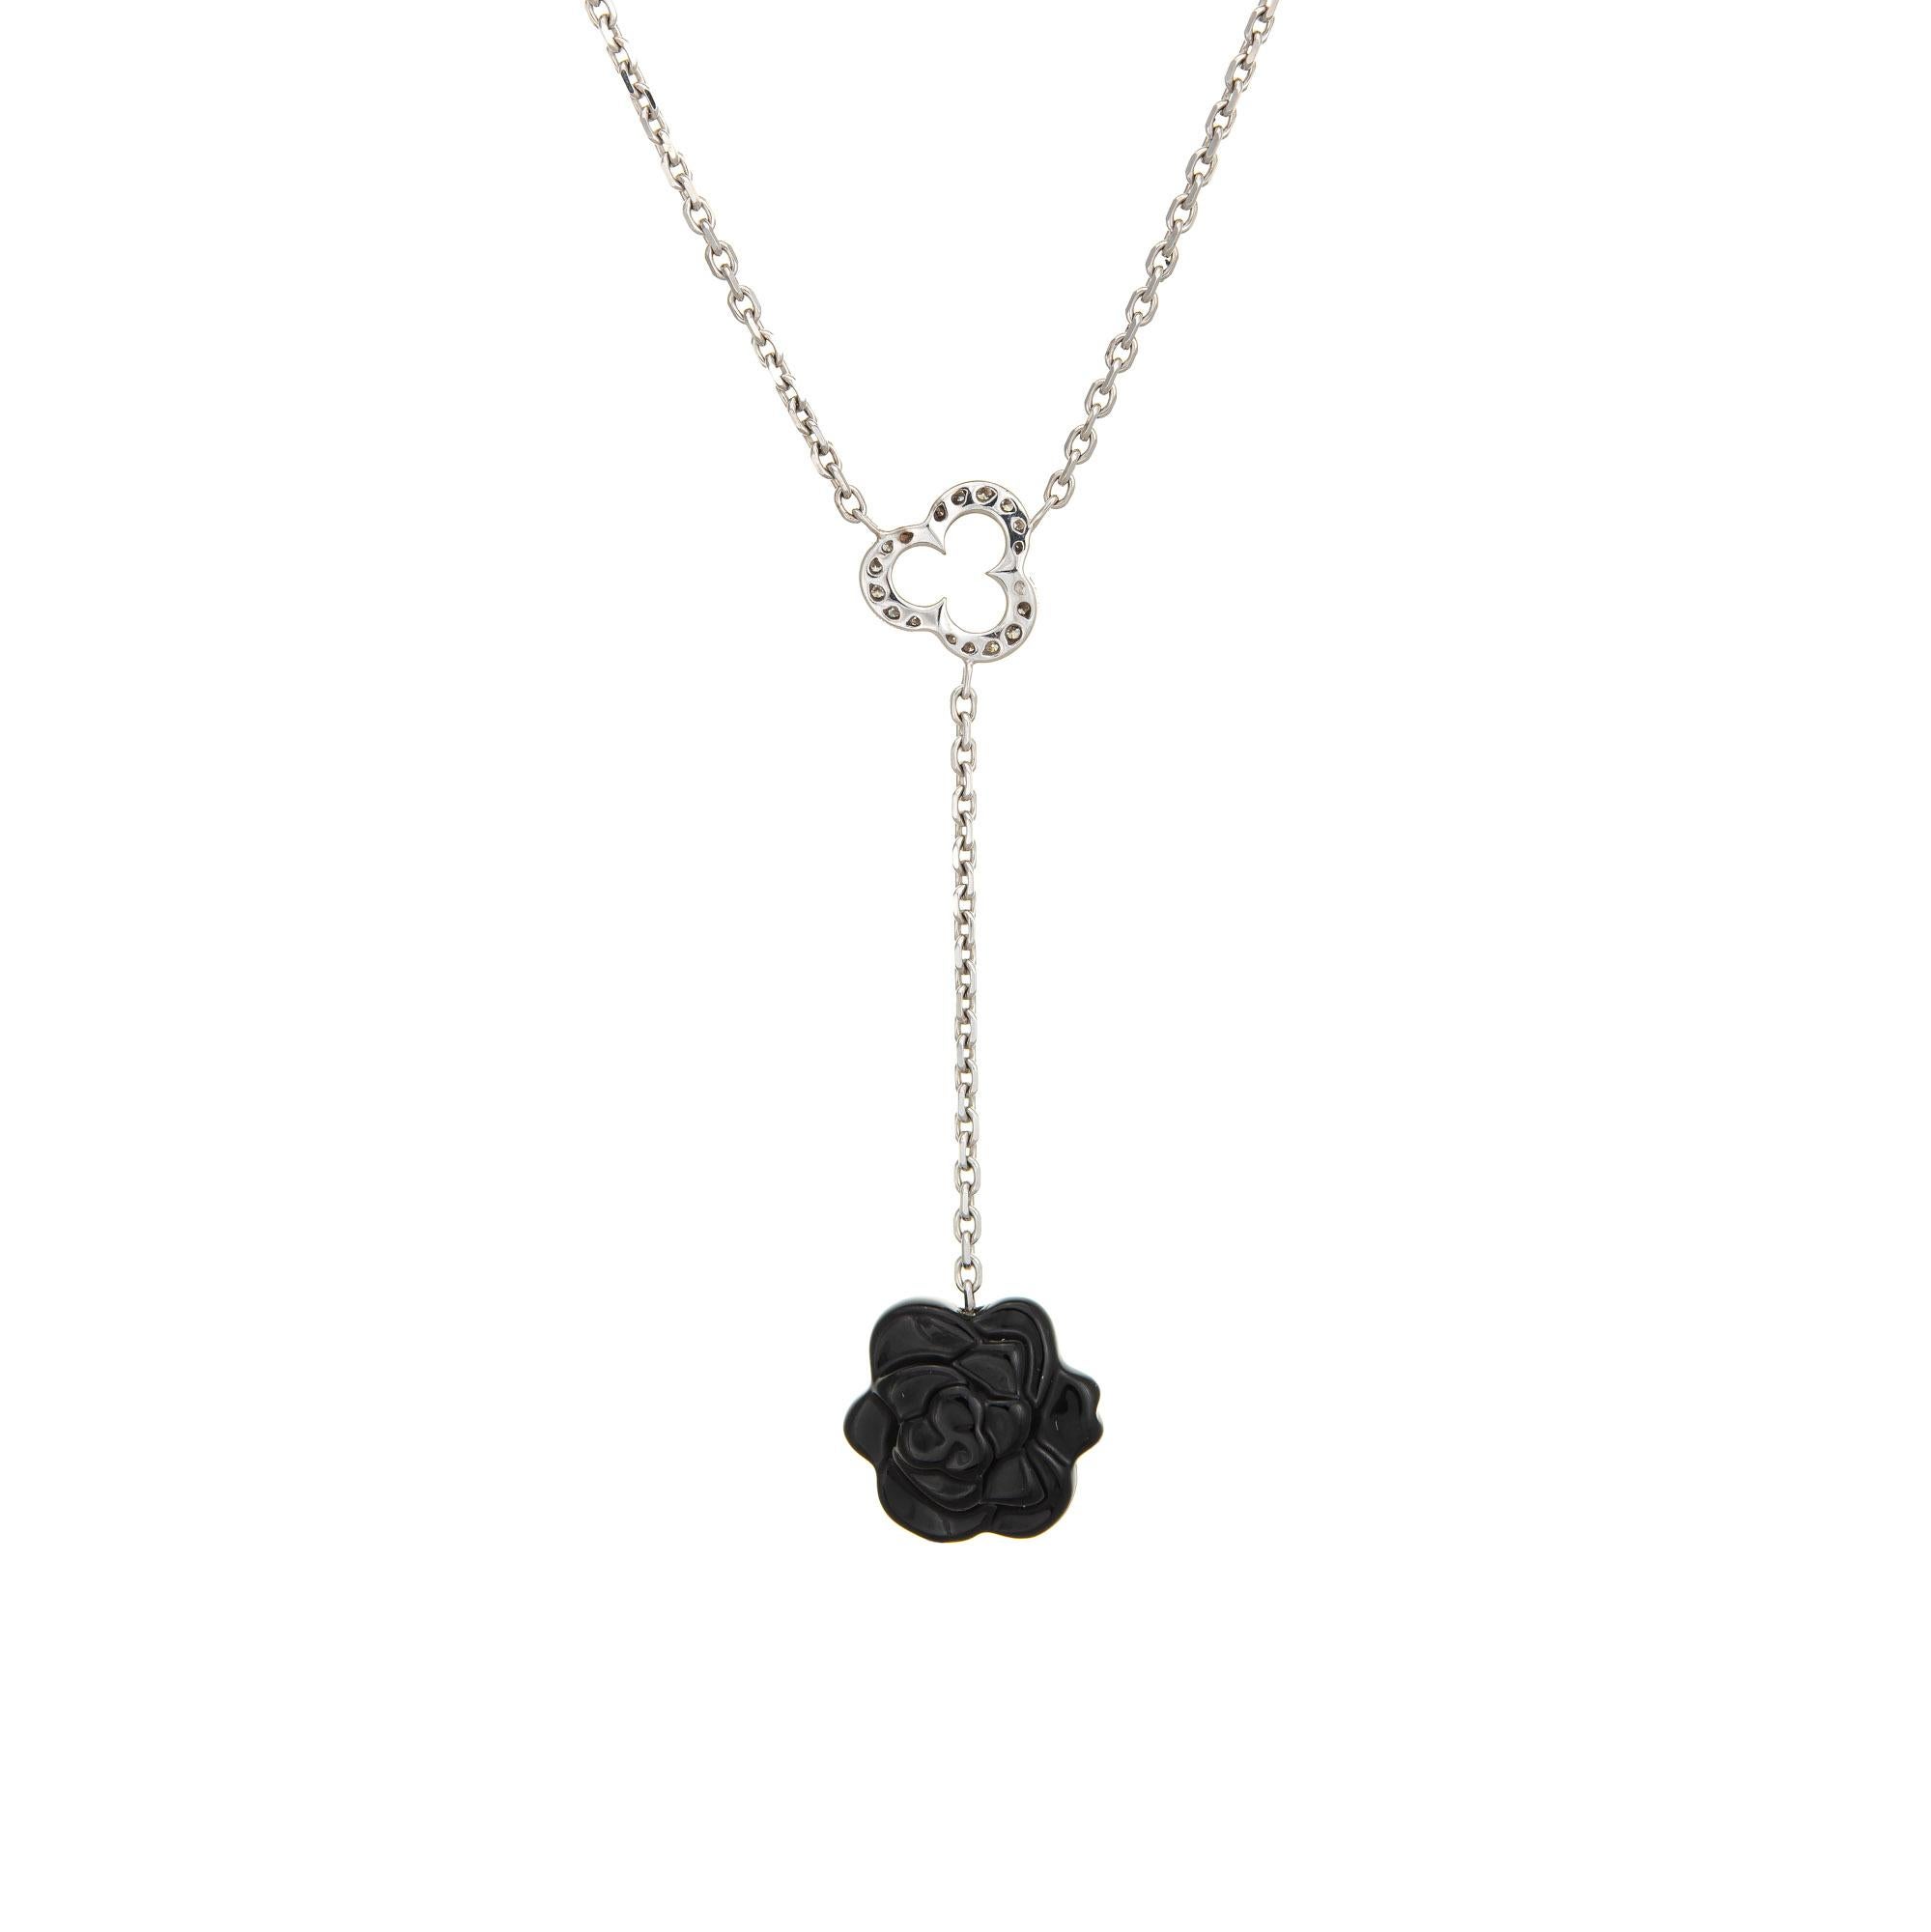 Elegant and finely detailed estate Chanel Camelia Sculpte necklace crafted in 18 karat white gold.  

Carved onyx flower measures 14mm diameter, accented with an estimated 0.08 carats of diamonds (estimated at F-G color and VVS2 clarity). The onyx